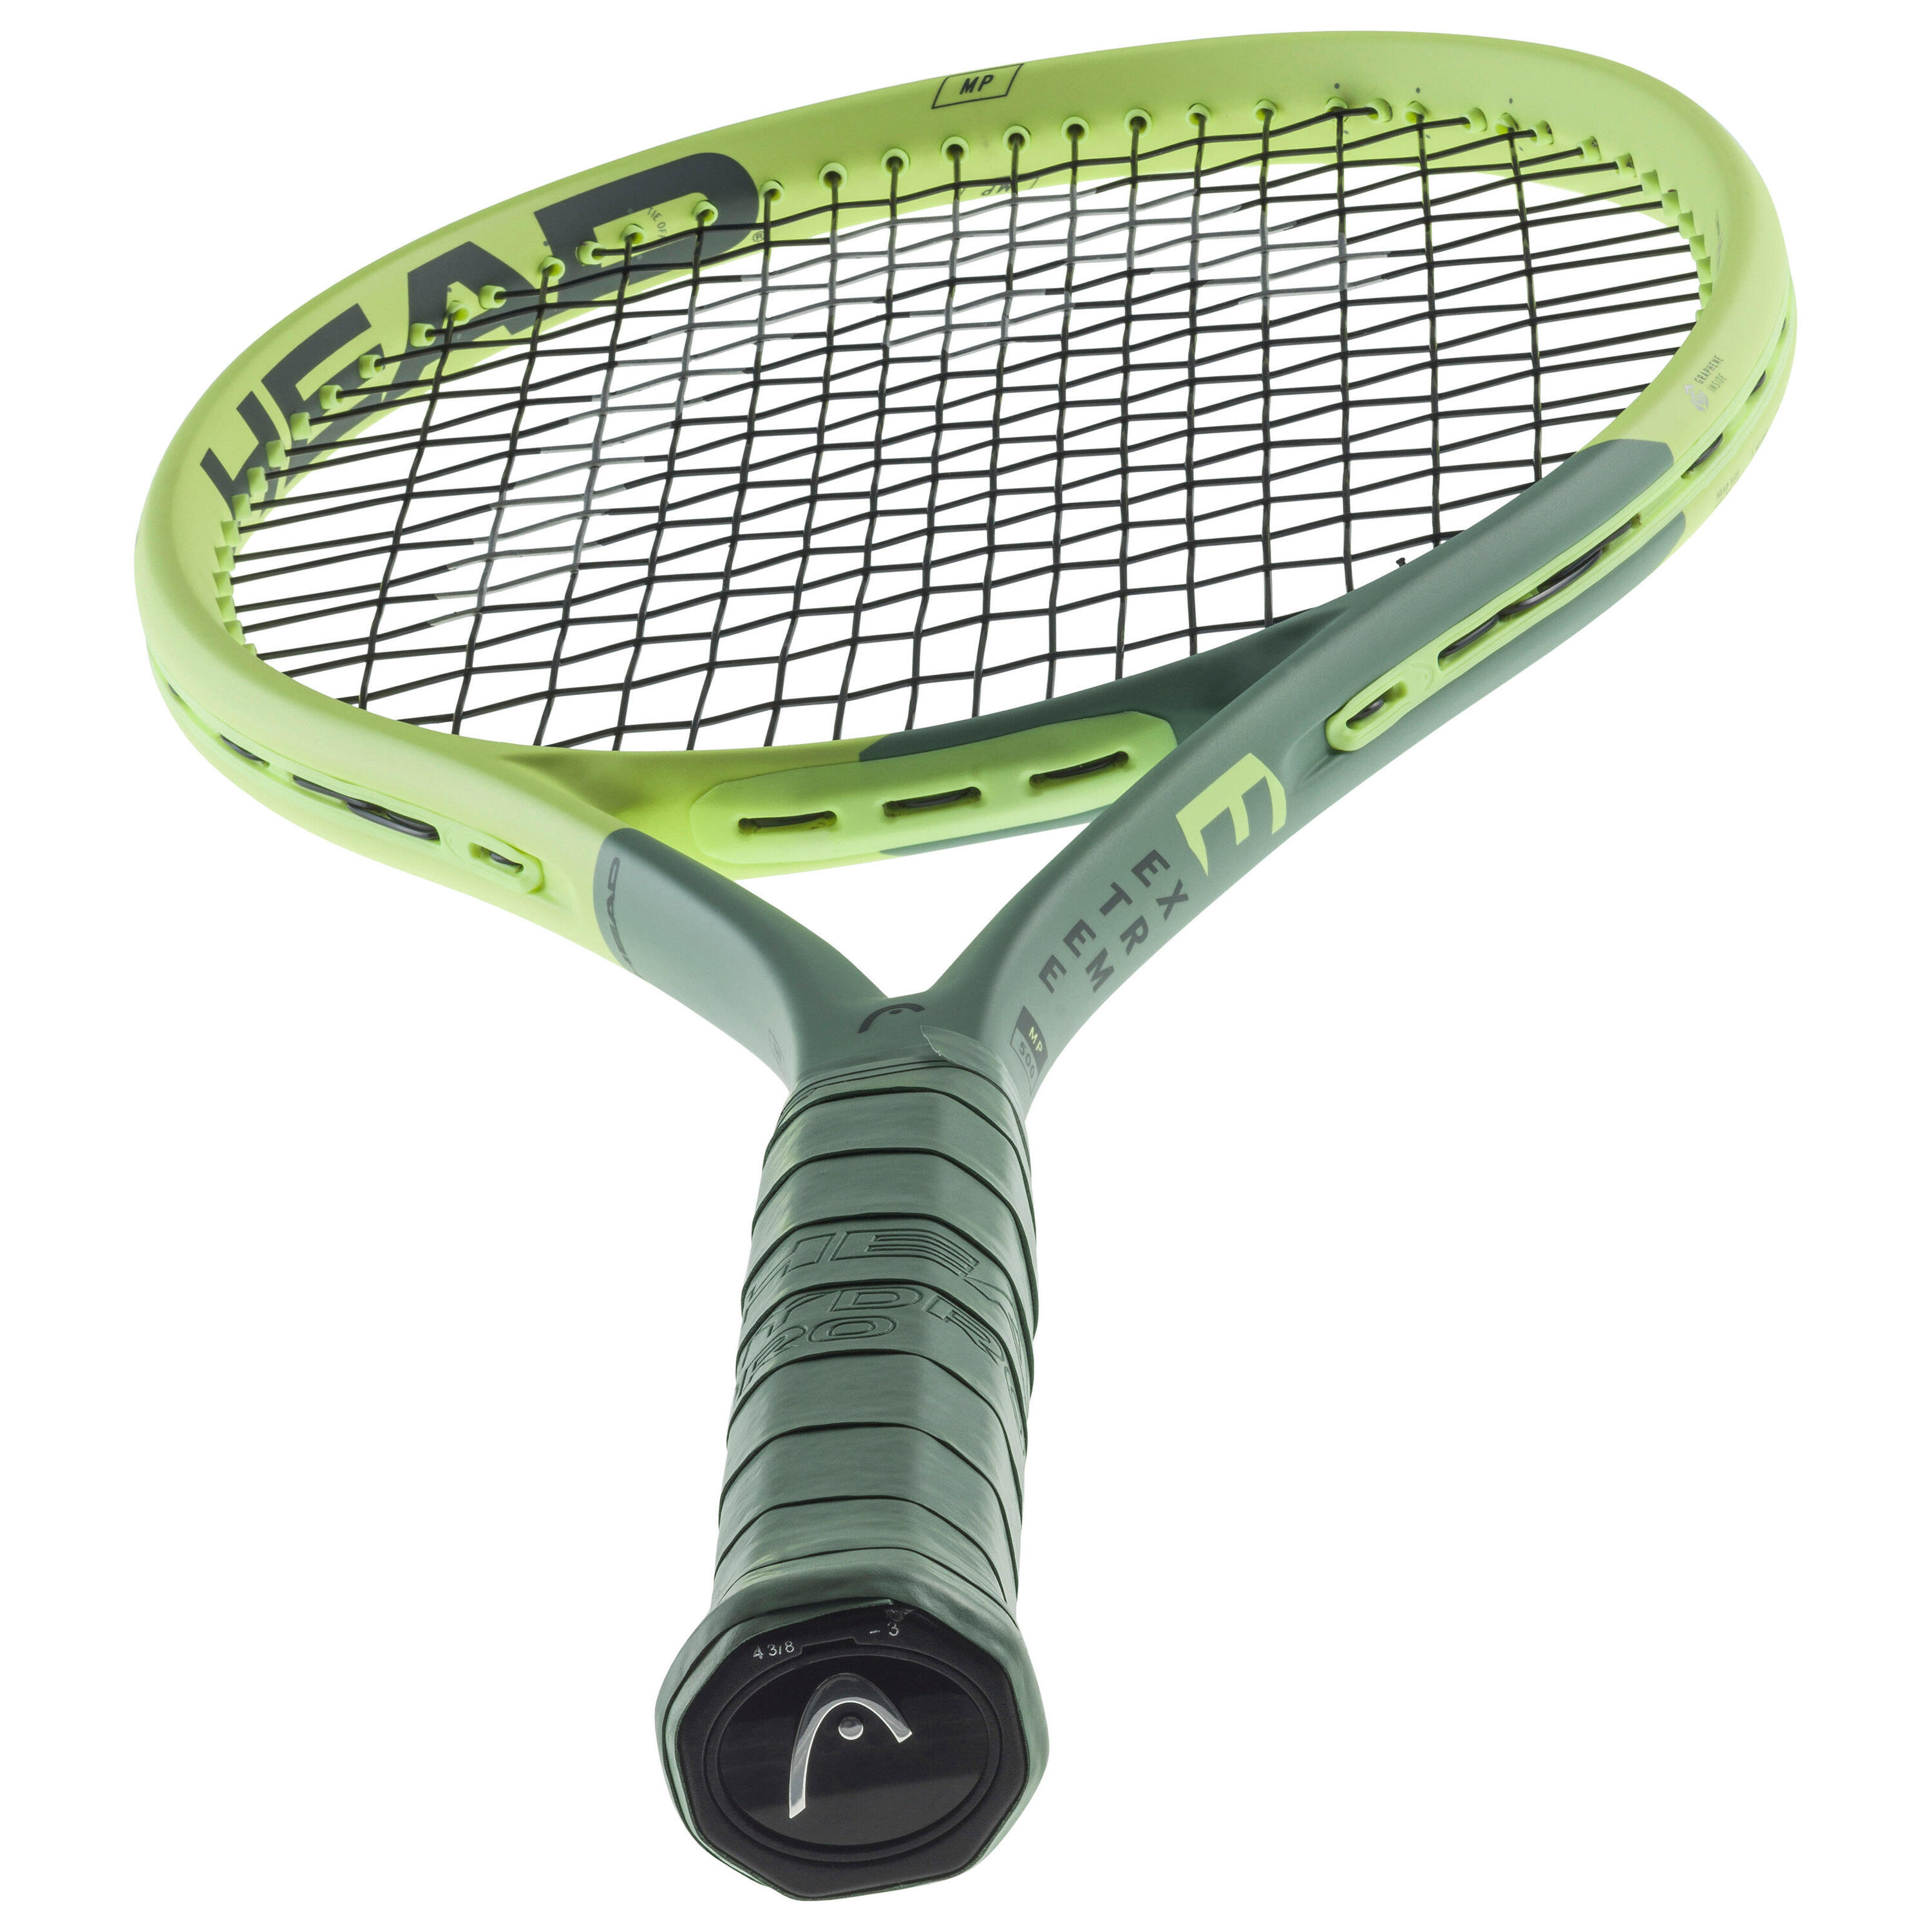 Adult Tennis Racket Auxetic Extreme MP 300 g- Grey/Yellow 9/9